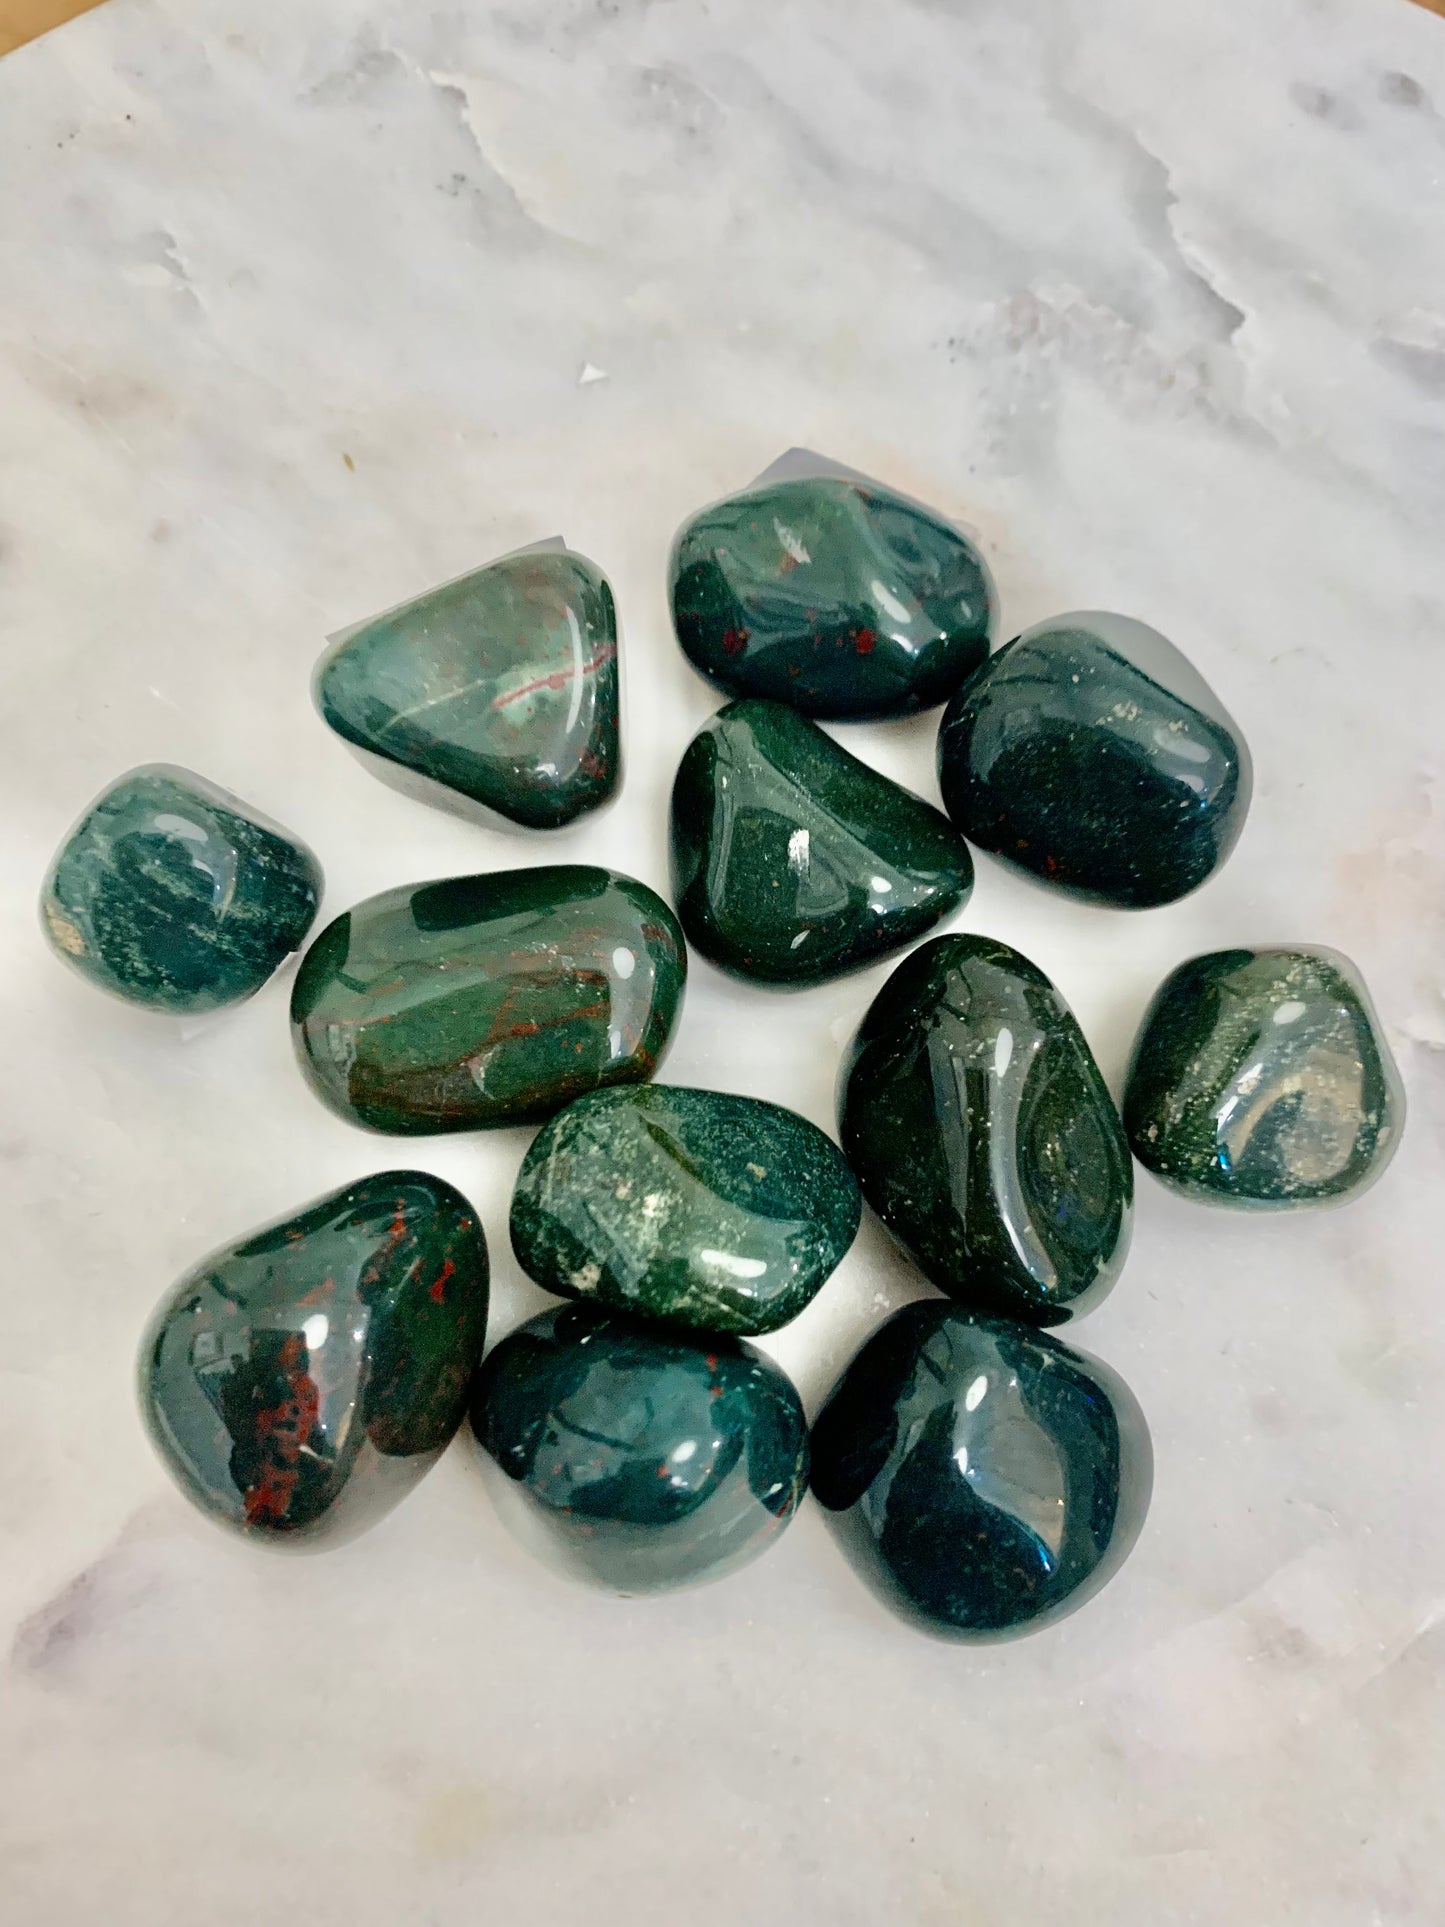 Tumbled Bloodstone Crystals